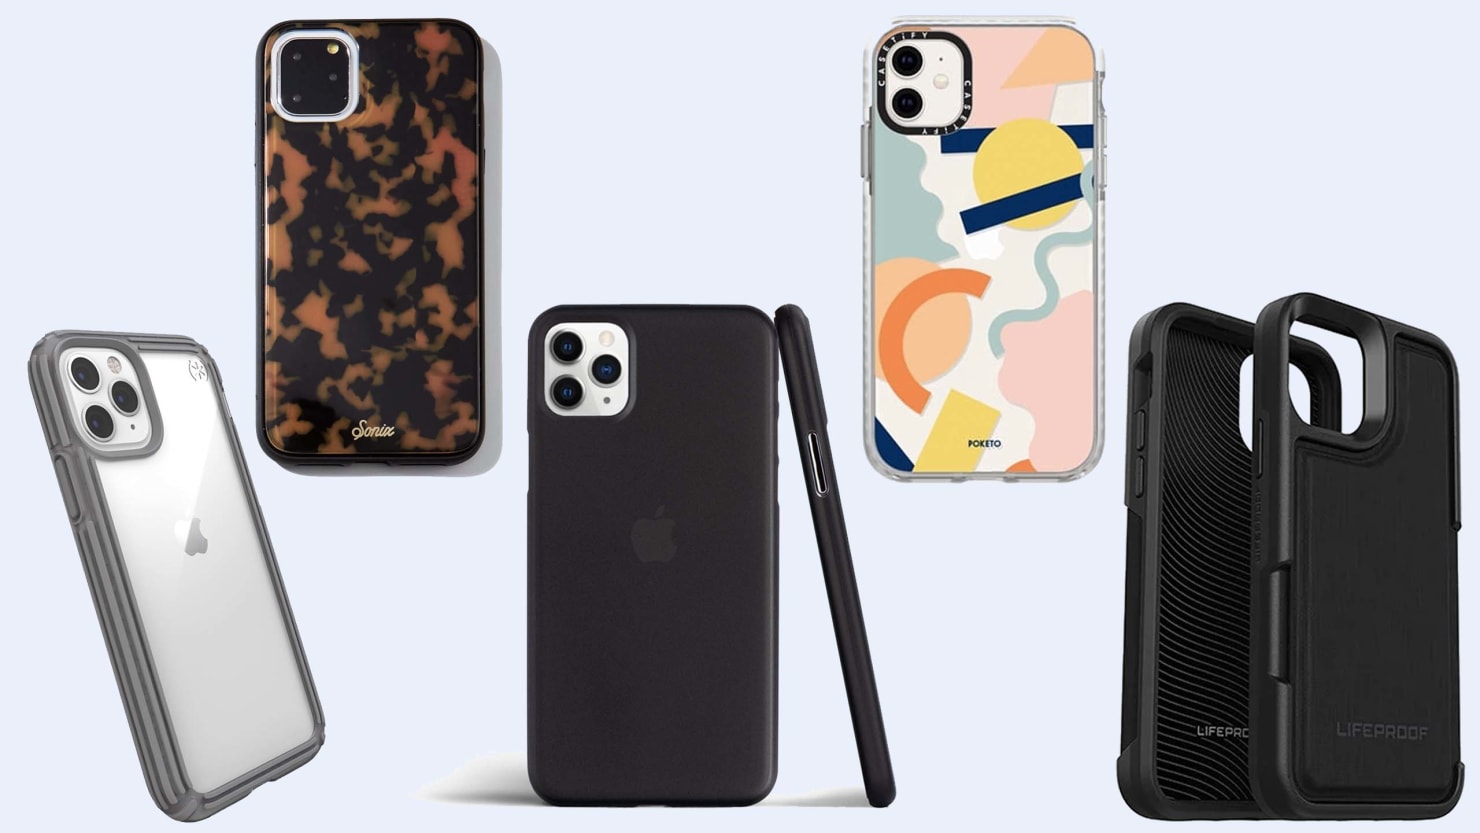 Best iPhone 11 Pro and iPhone 11 Pro Max cases: protect your new